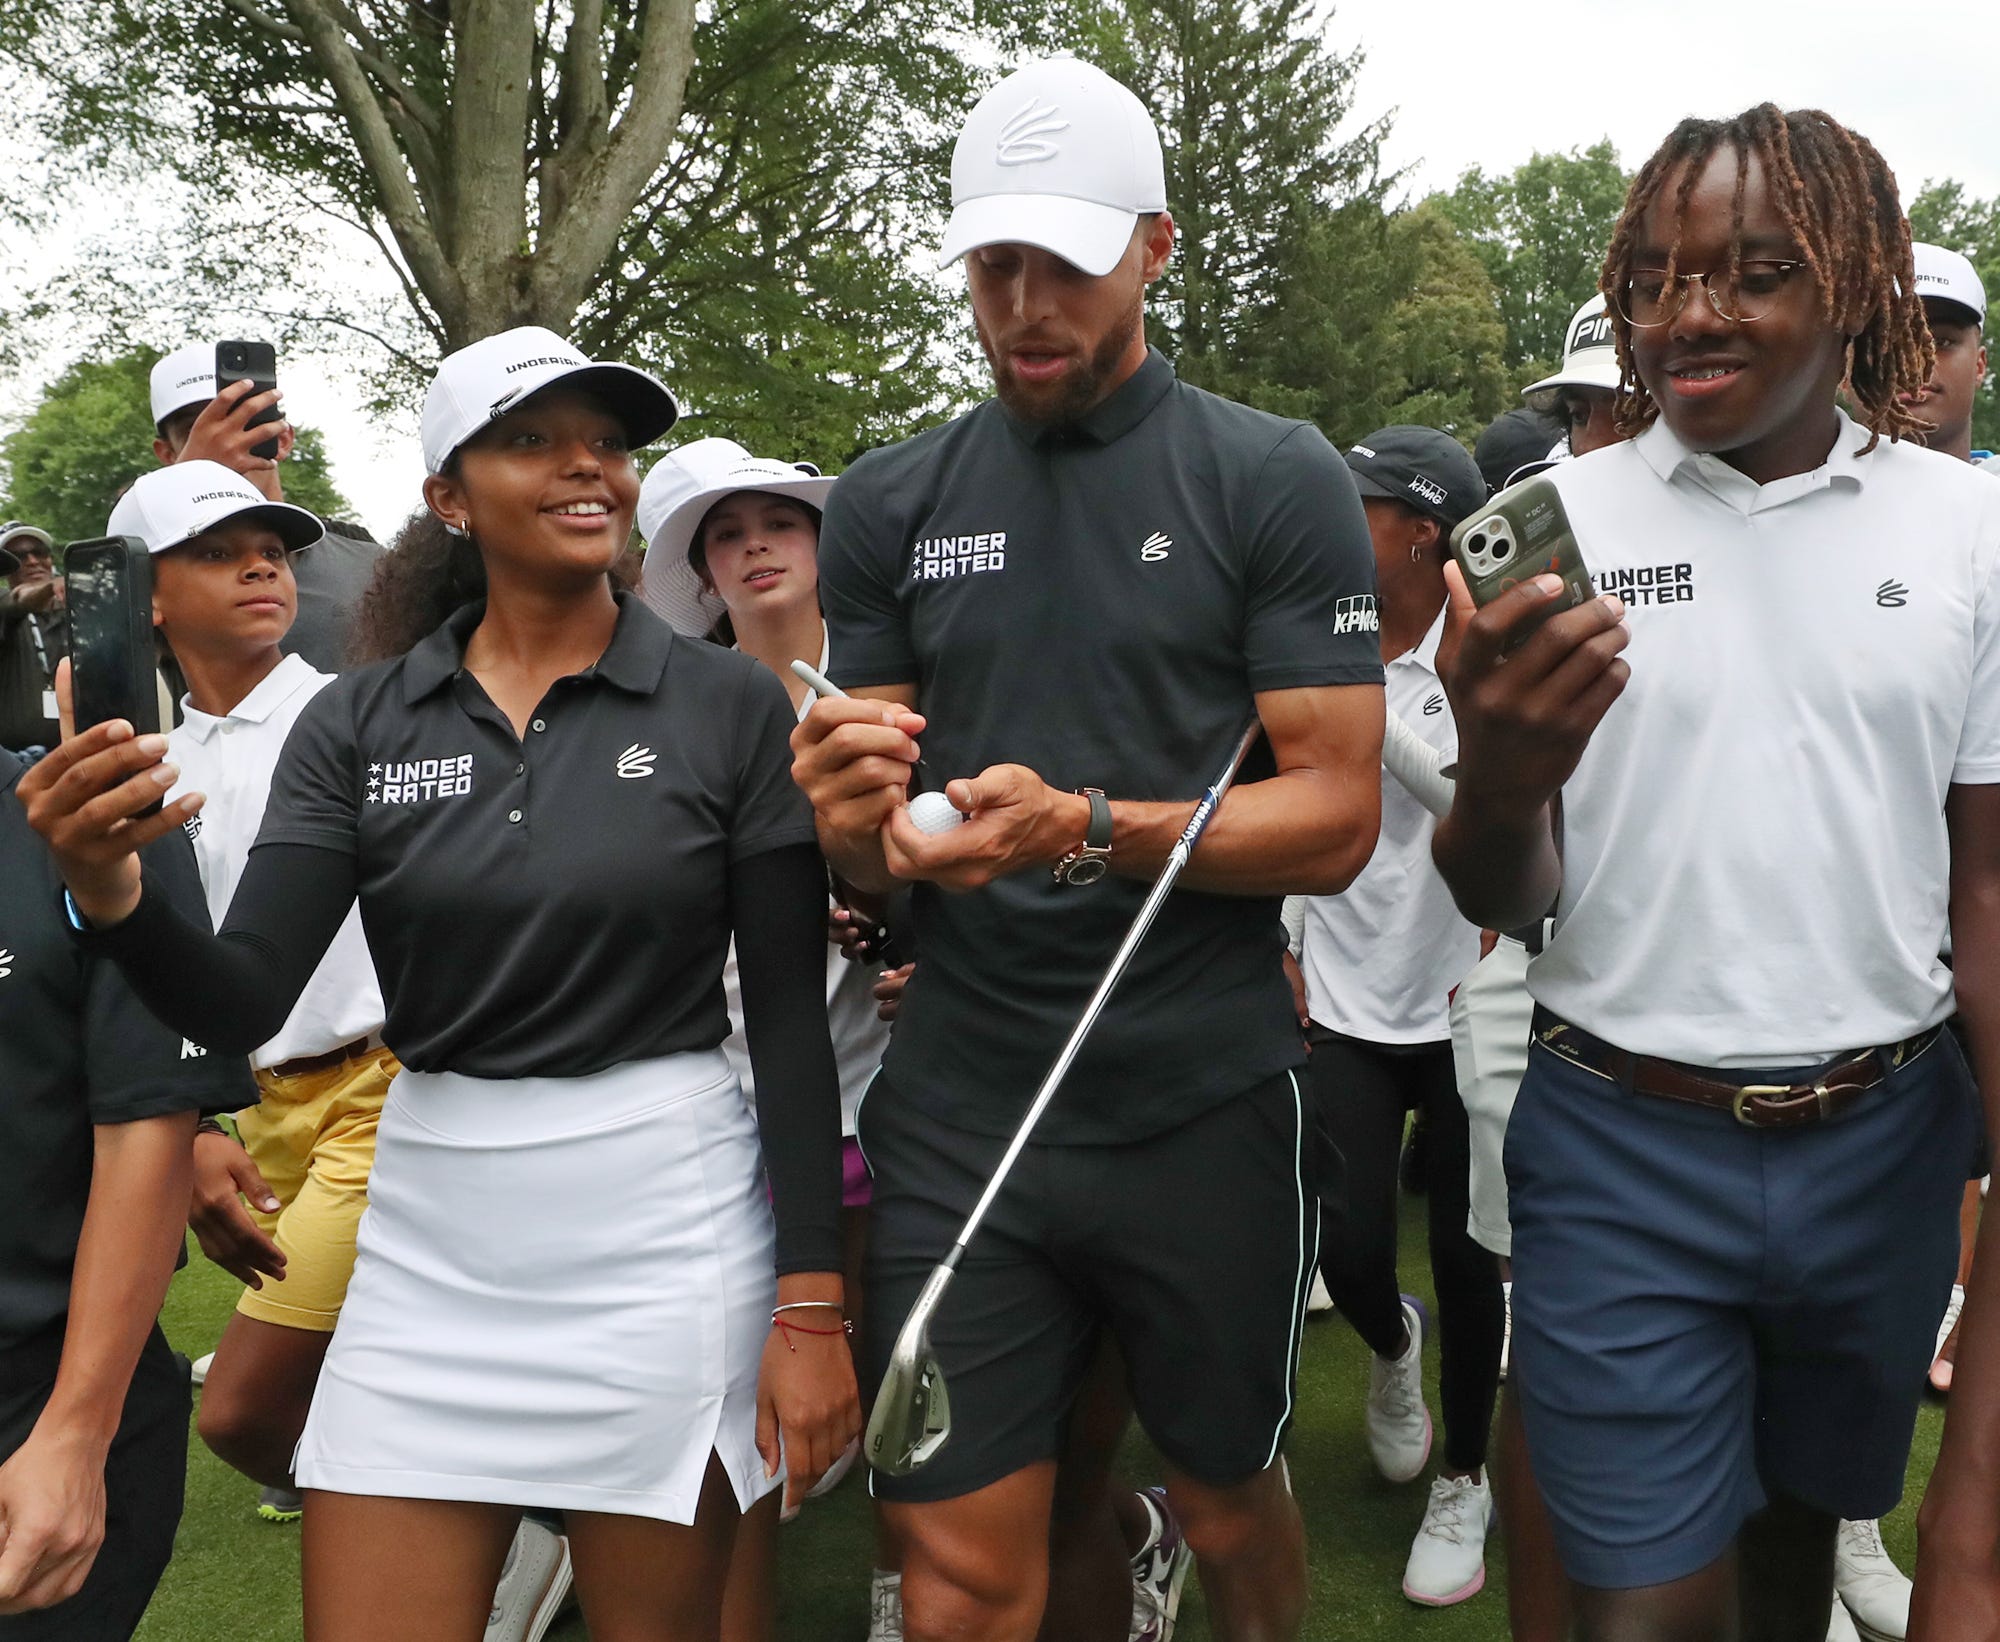 Tahoe celebrity golf: Steph Curry would love to win celebrity golf while still active in NBA